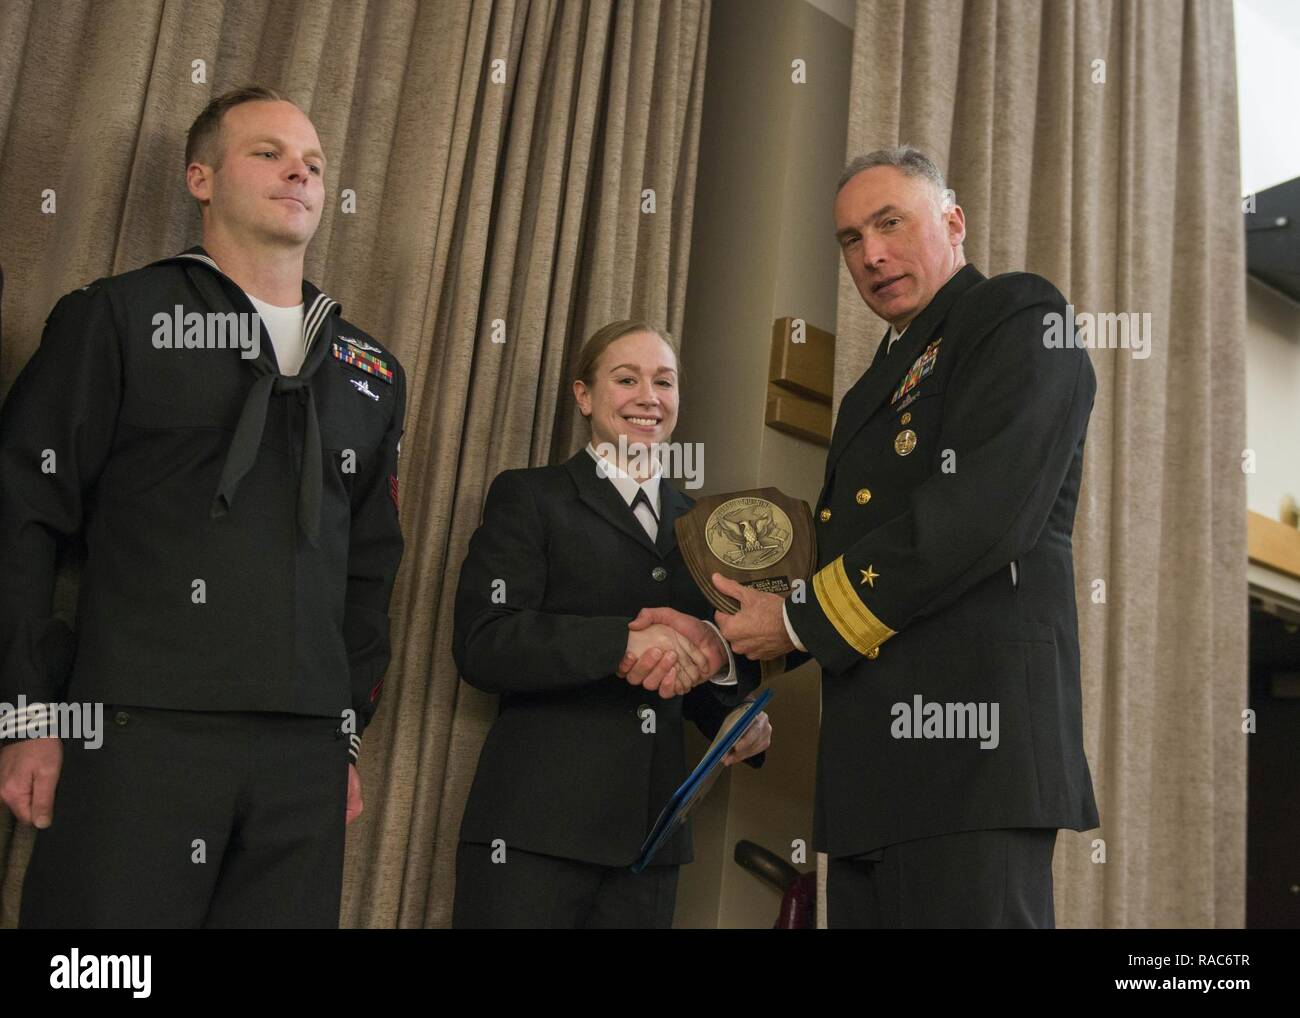 BANGOR, Wash. (Jan. 17, 2017) Rear Adm. John Tammen, commander, Submarine Group 9, congratulates Sonar Technician (Surface) 2nd Class Kegan Dyer, from Pownal, Maine, assigned to Naval Ocean Processing Facility, Whidbey Island, on becoming the 2016 Sea Junior Sailor of the Year. The Sailor of the Year Program was introduced in 1973, by former Chief of Naval Operations Adm. Elmo Zumwalt, to recognize superior performance at every command. Stock Photo